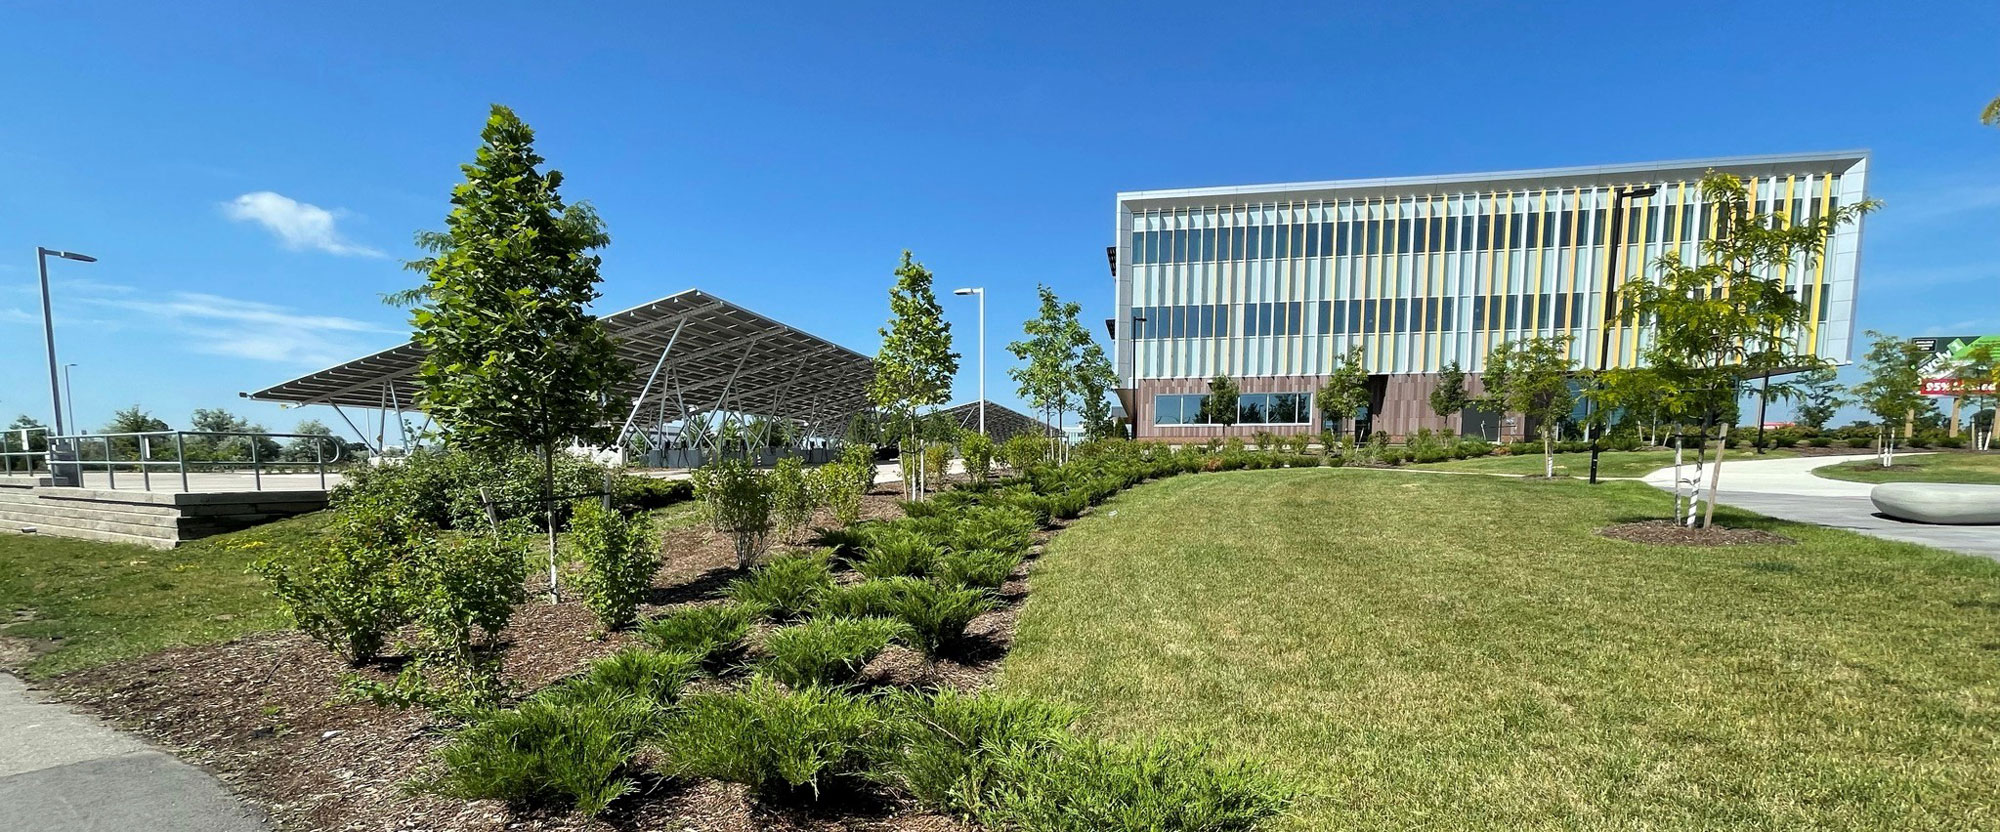 view of landscaped gardens at the Research & Technology Park in Waterloo